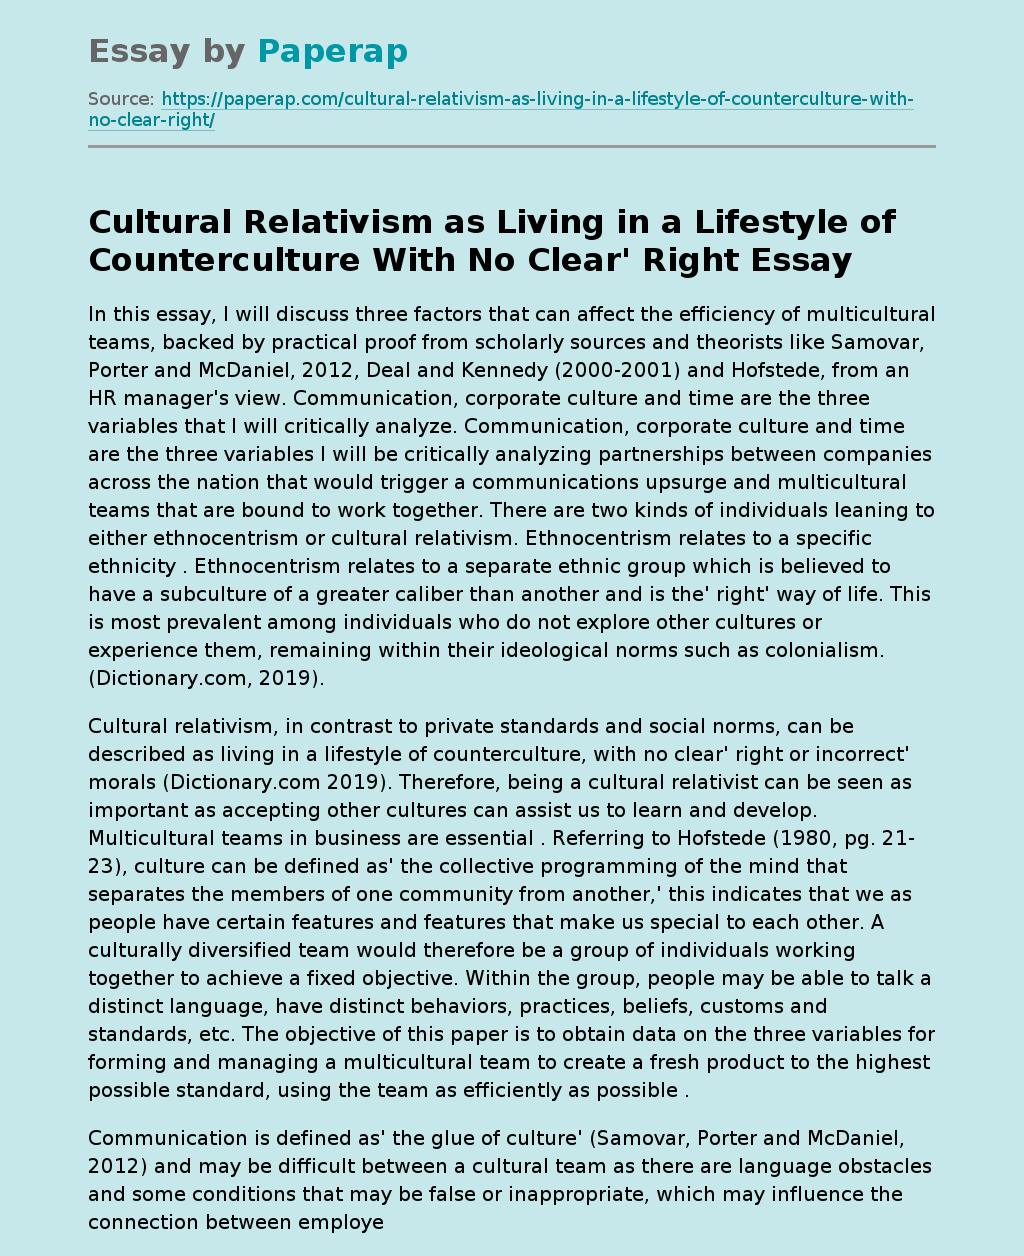 Cultural Relativism as Living in a Lifestyle of Counterculture With No Clear' Right